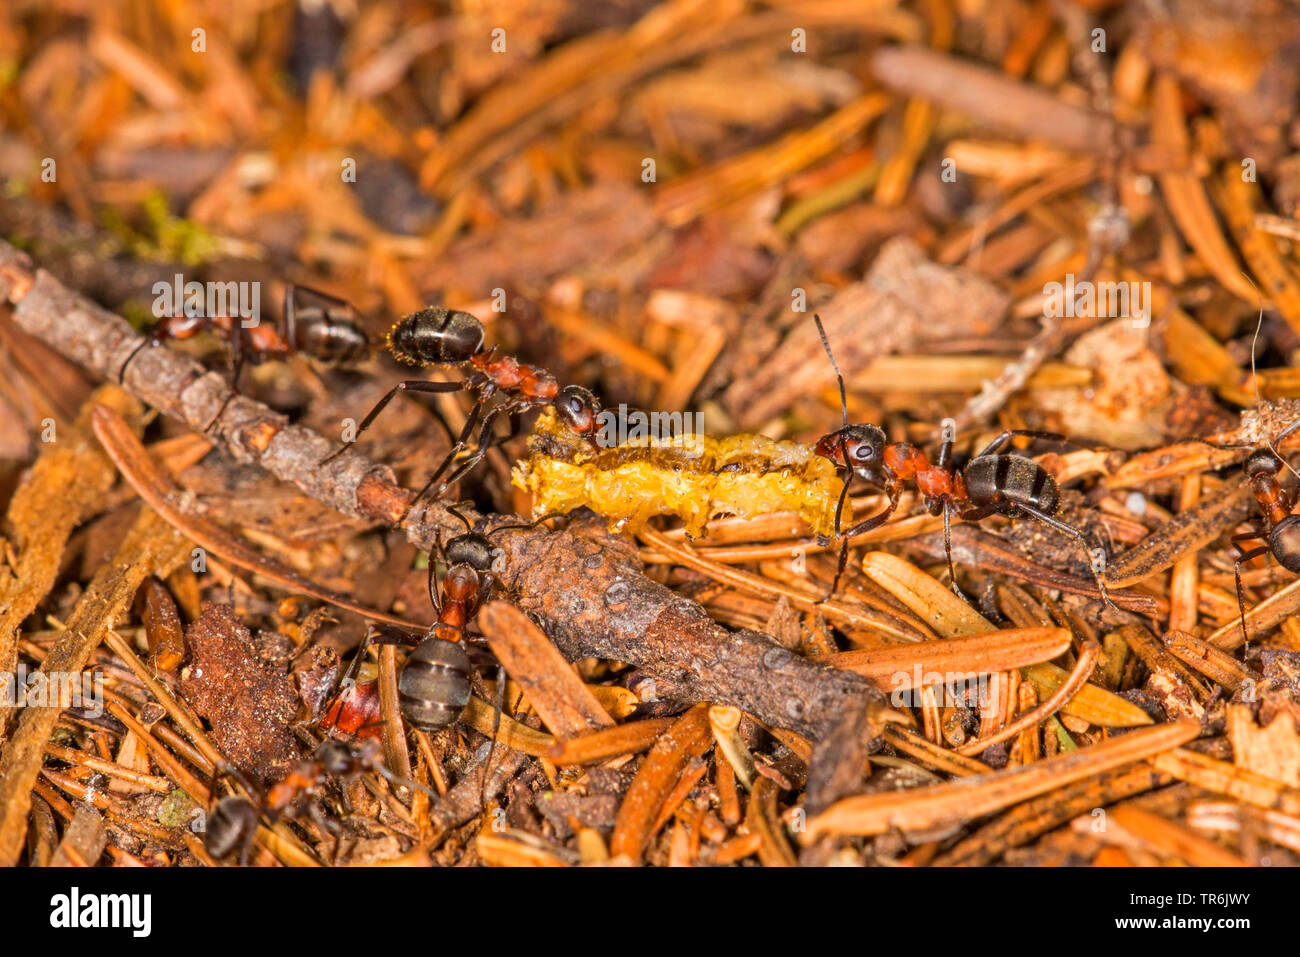 small red wood ant (Formica polyctena), transporting a caterpillar to the ant hill, Germany, Bavaria Stock Photo